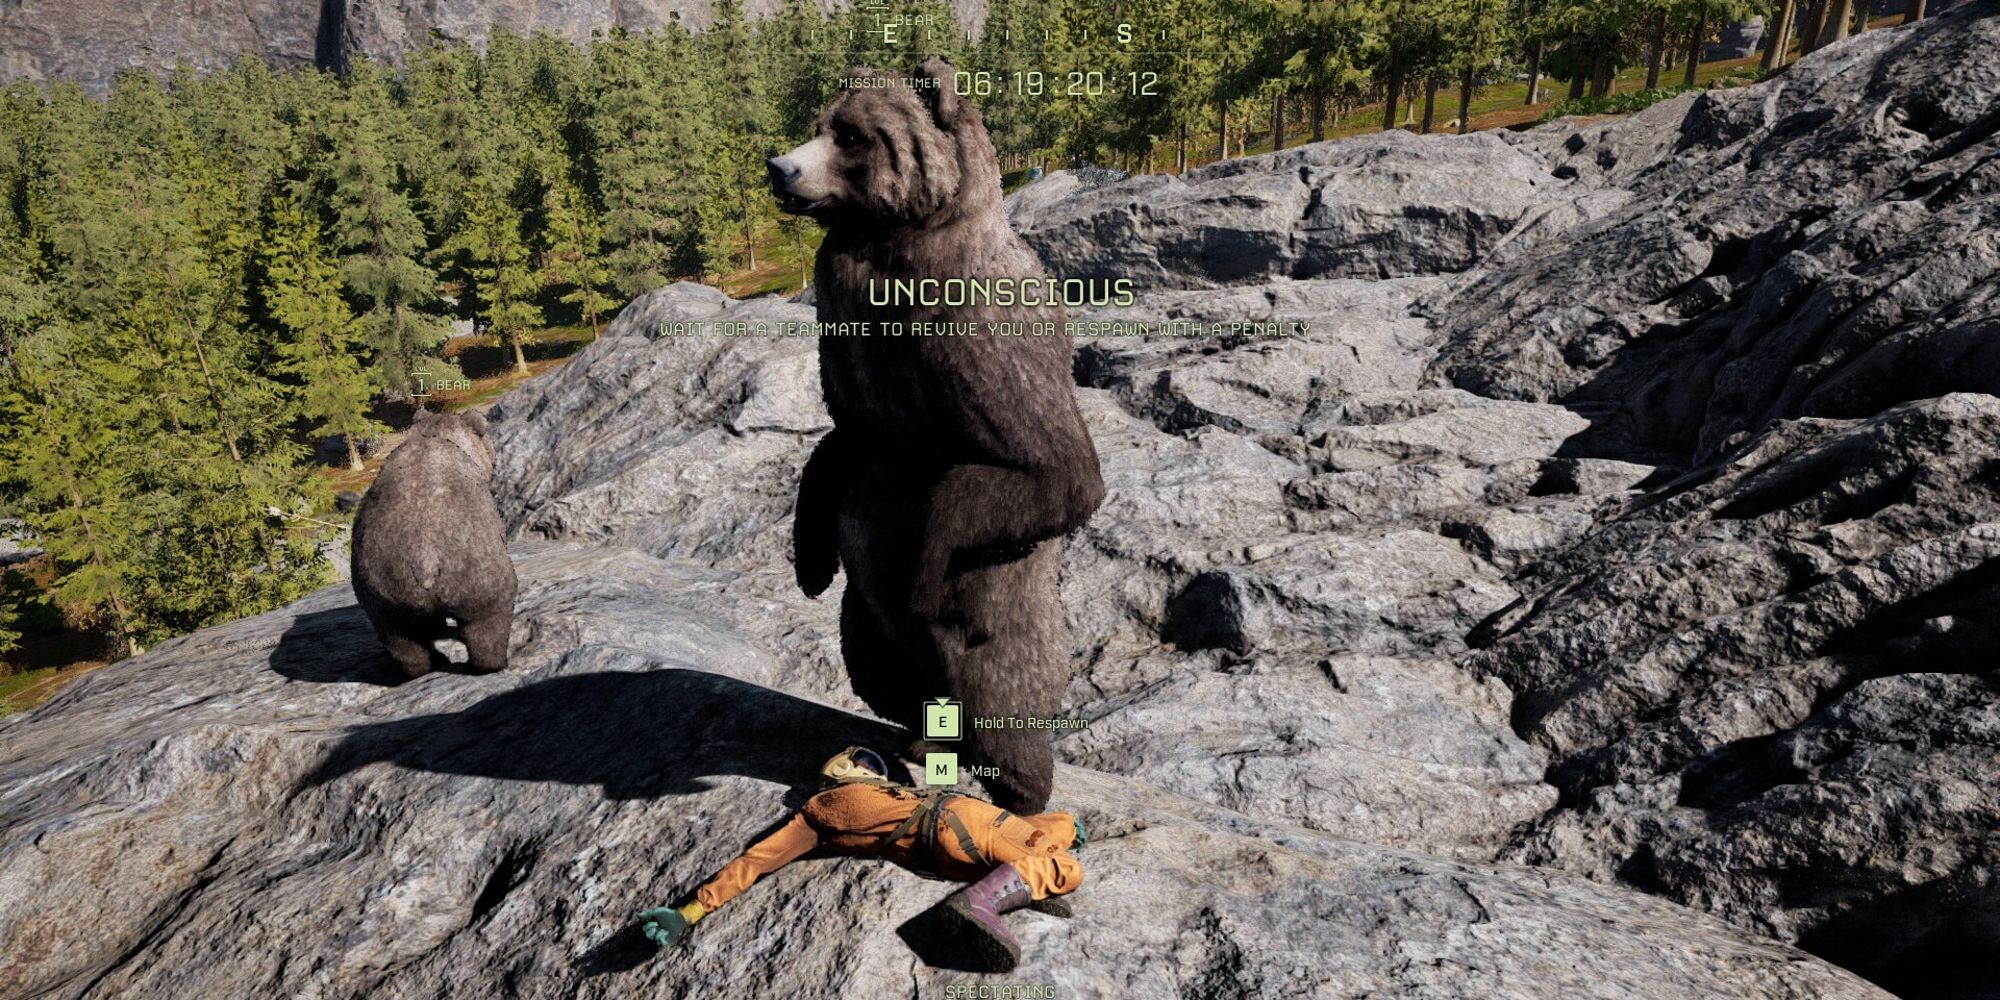 player unconscious on ground after bear attack